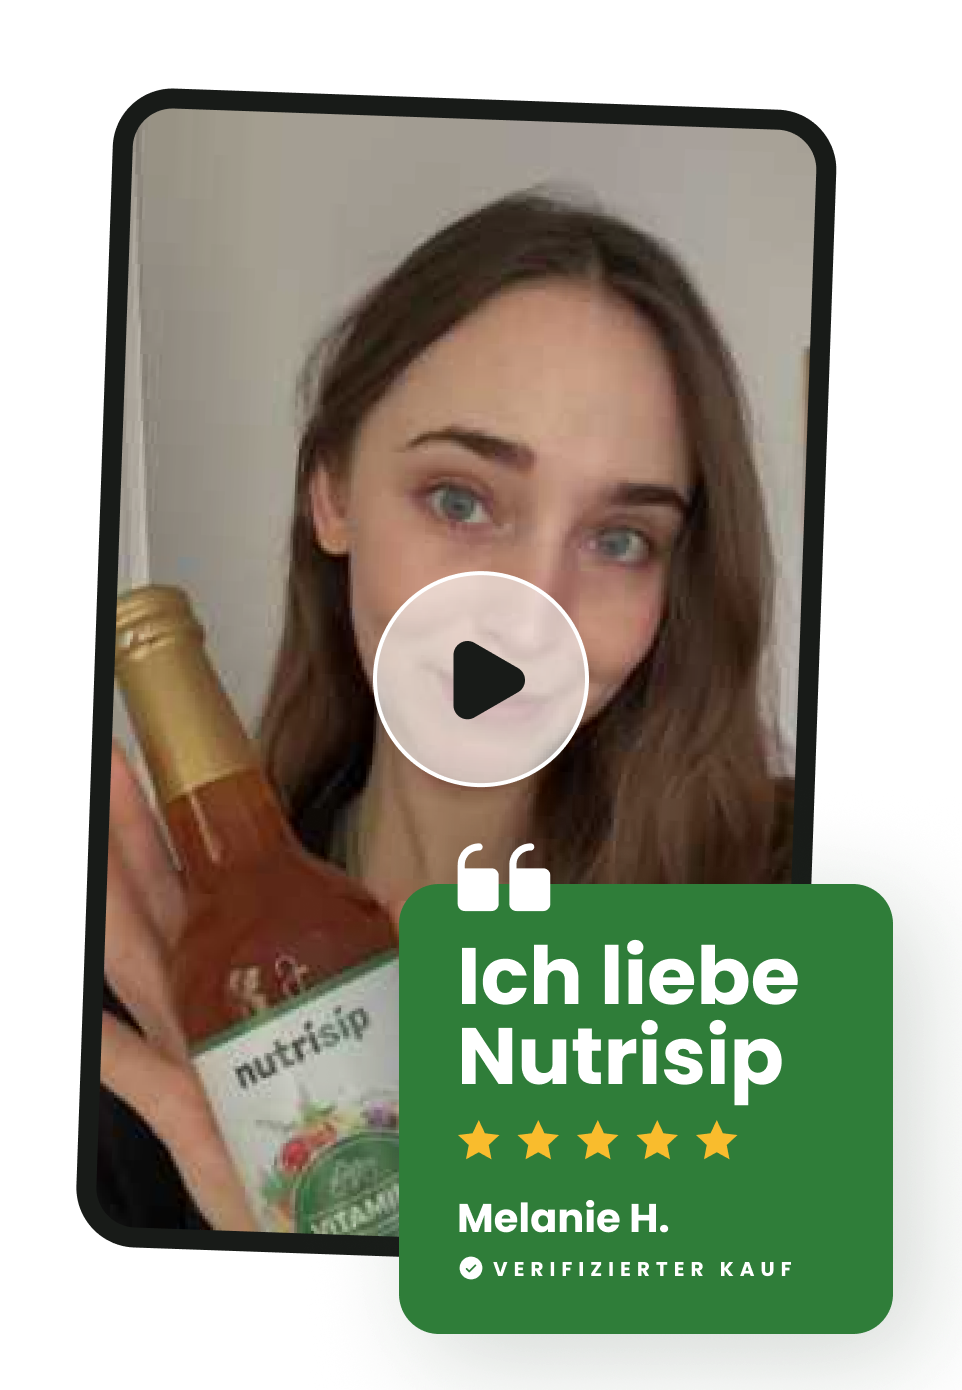 Nutrisip 5 star review